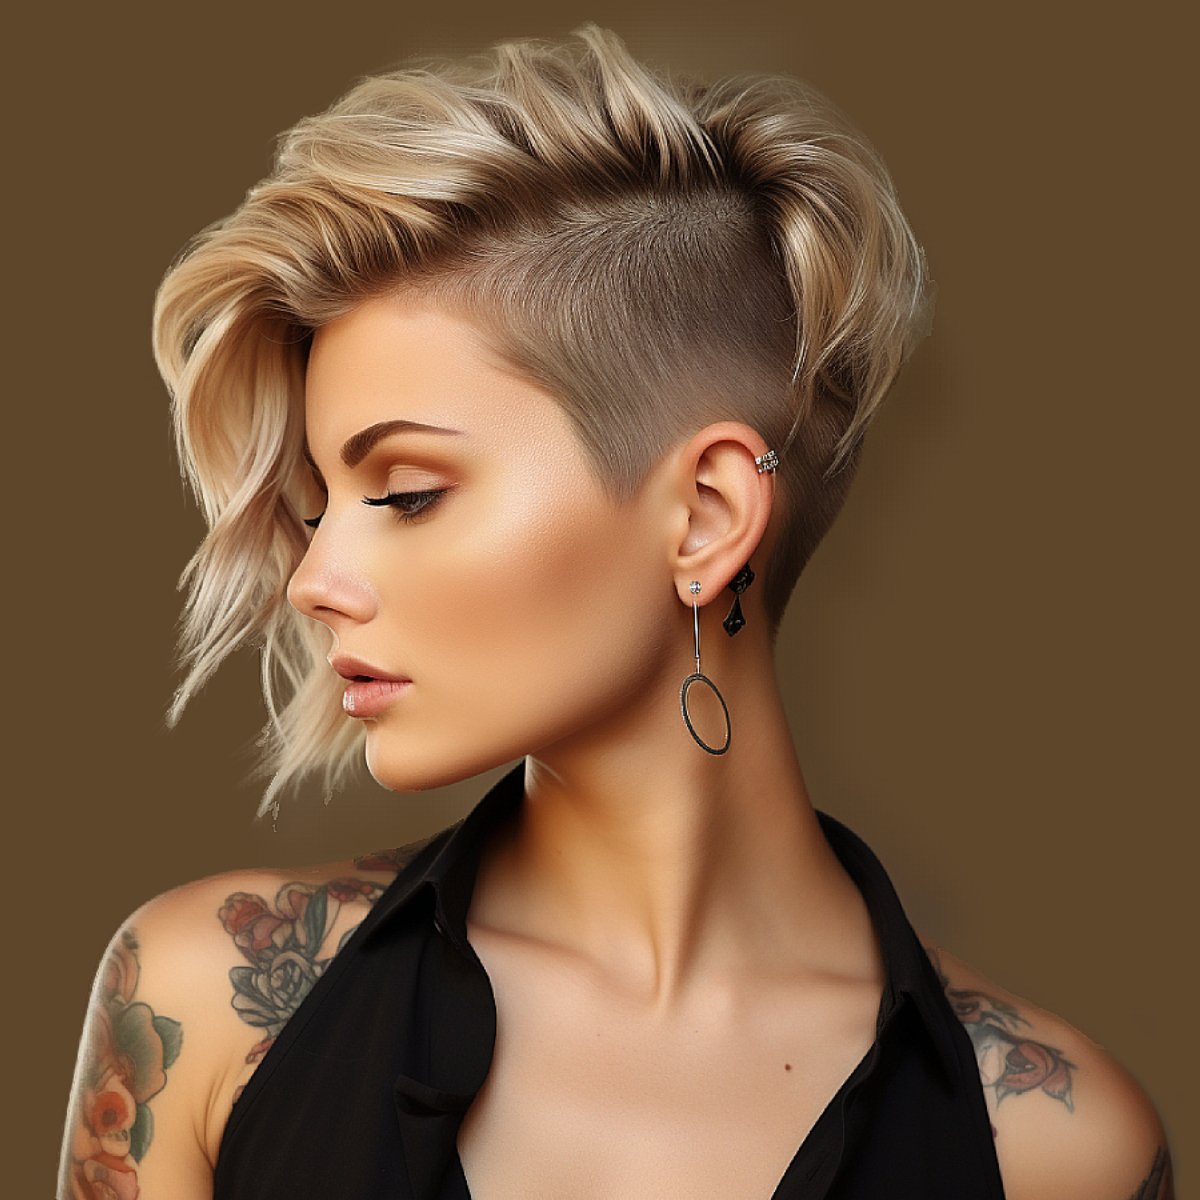 The 39 Best Low Maintenance Haircuts for Short Hair